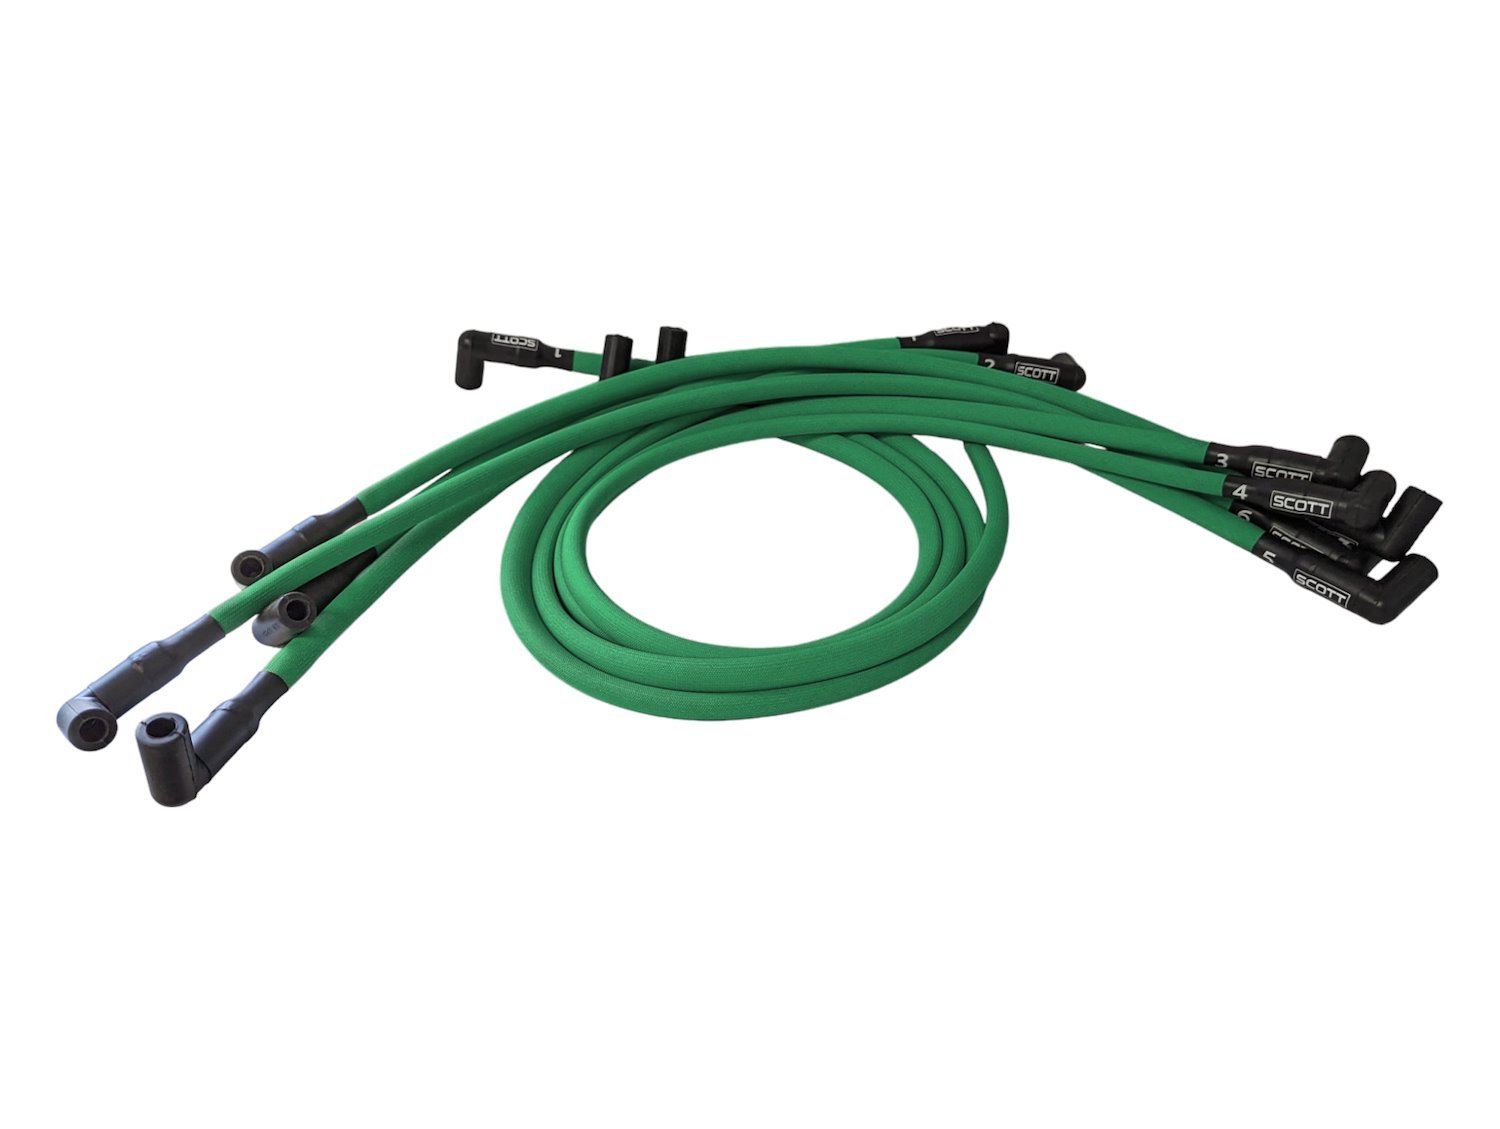 SPW300-PS-437-4 Super Mag Fiberglass-Oversleeved Spark Plug Wire Set for Small Block Chevy, Over & Under [Green]